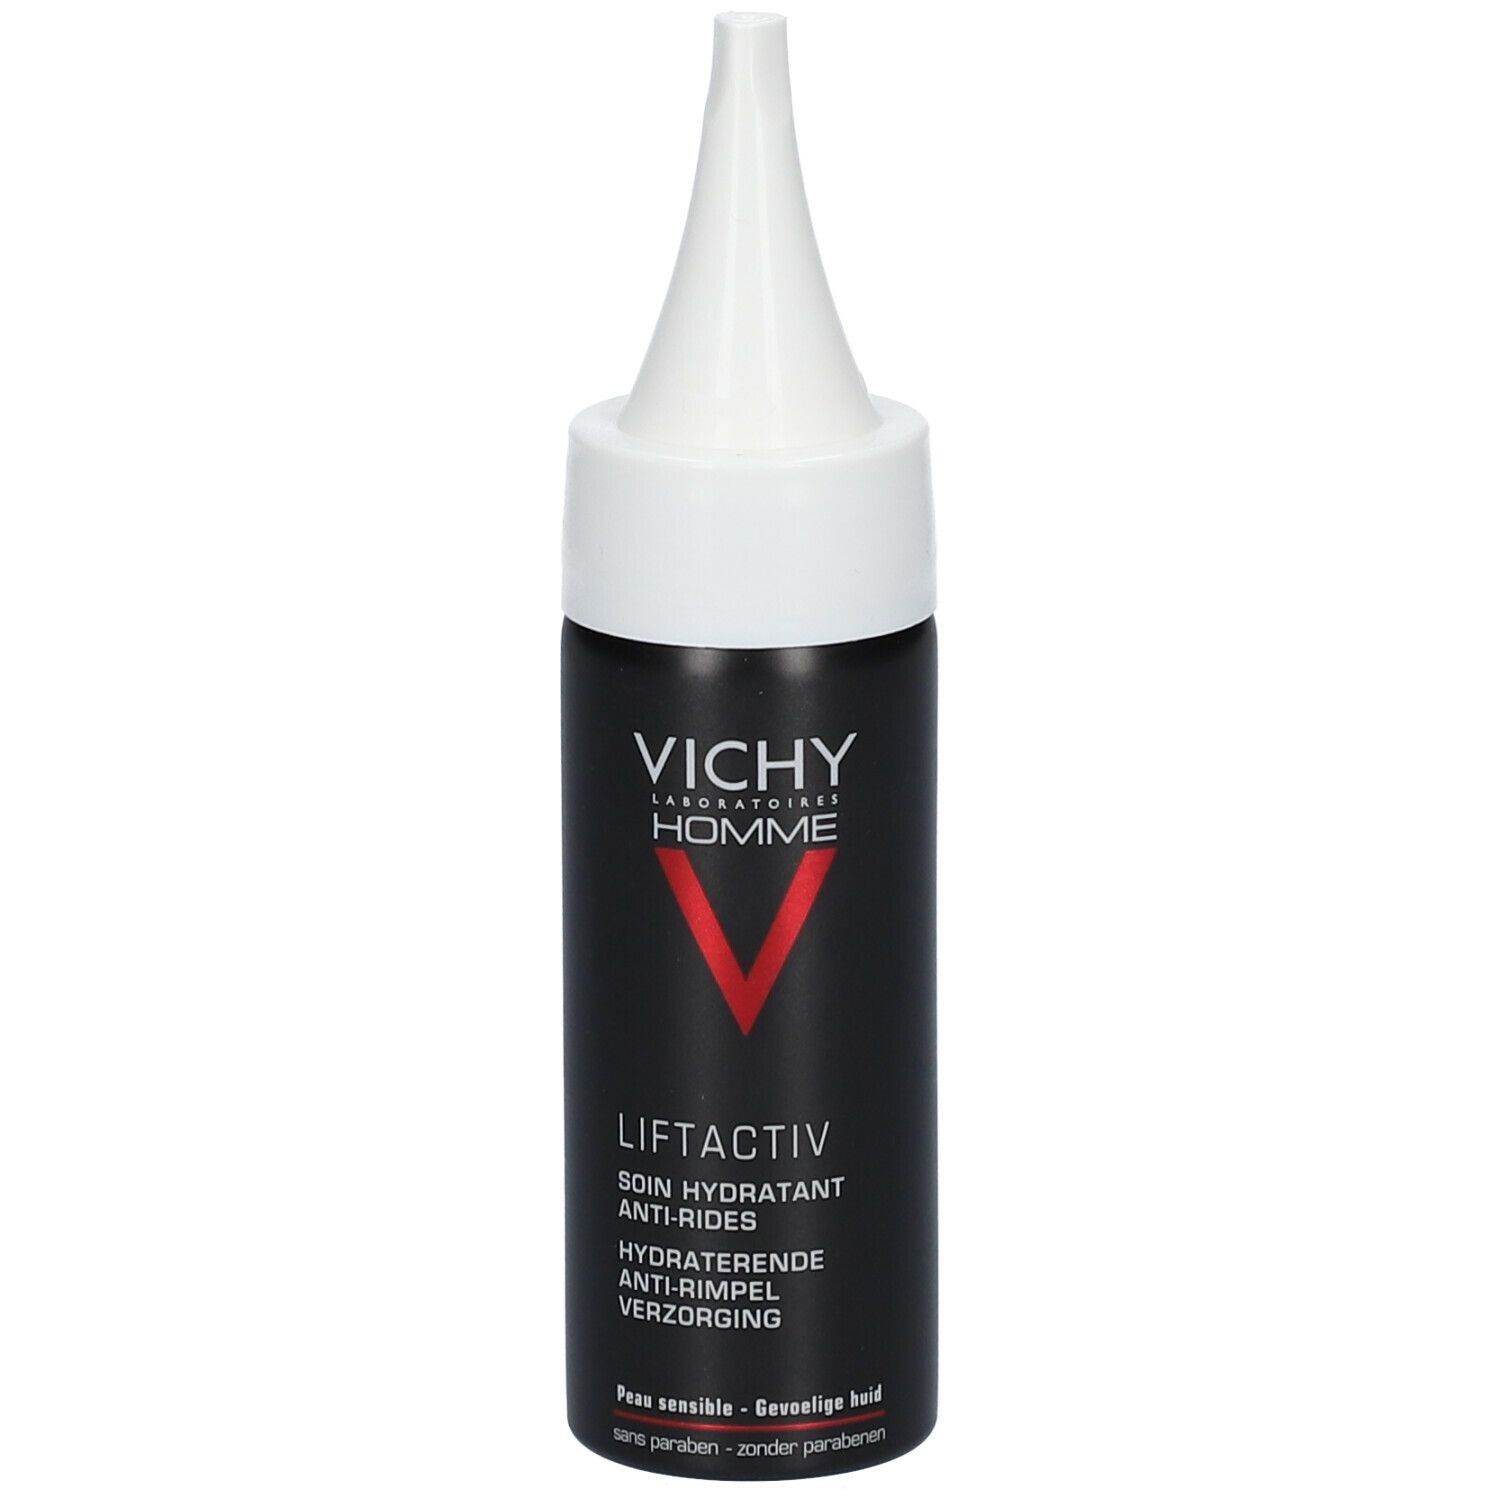 Image of Vichy Homme Liftactiv Soin Actif Antirides Antifatigue, Soin antiride et antifatigue, fl 3